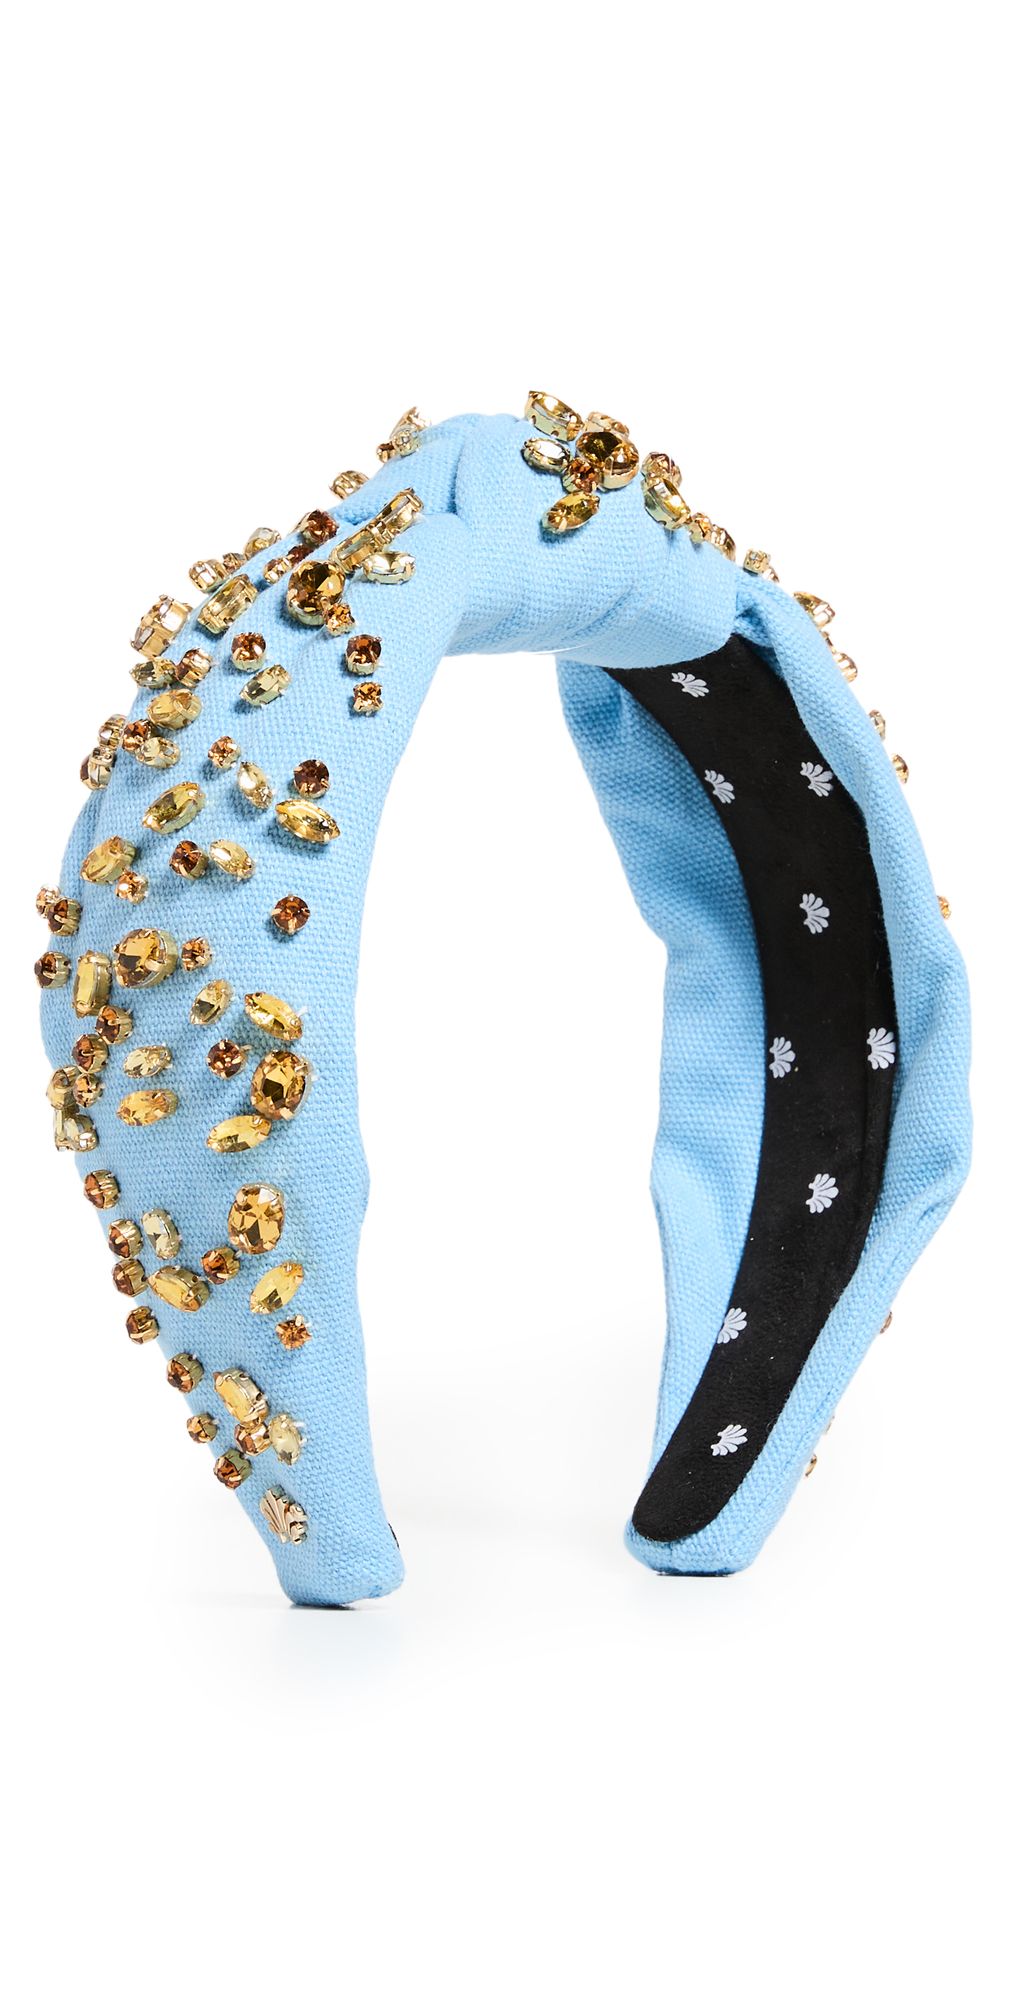 Mixed Crystal Woven Knotted Headband | Shopbop